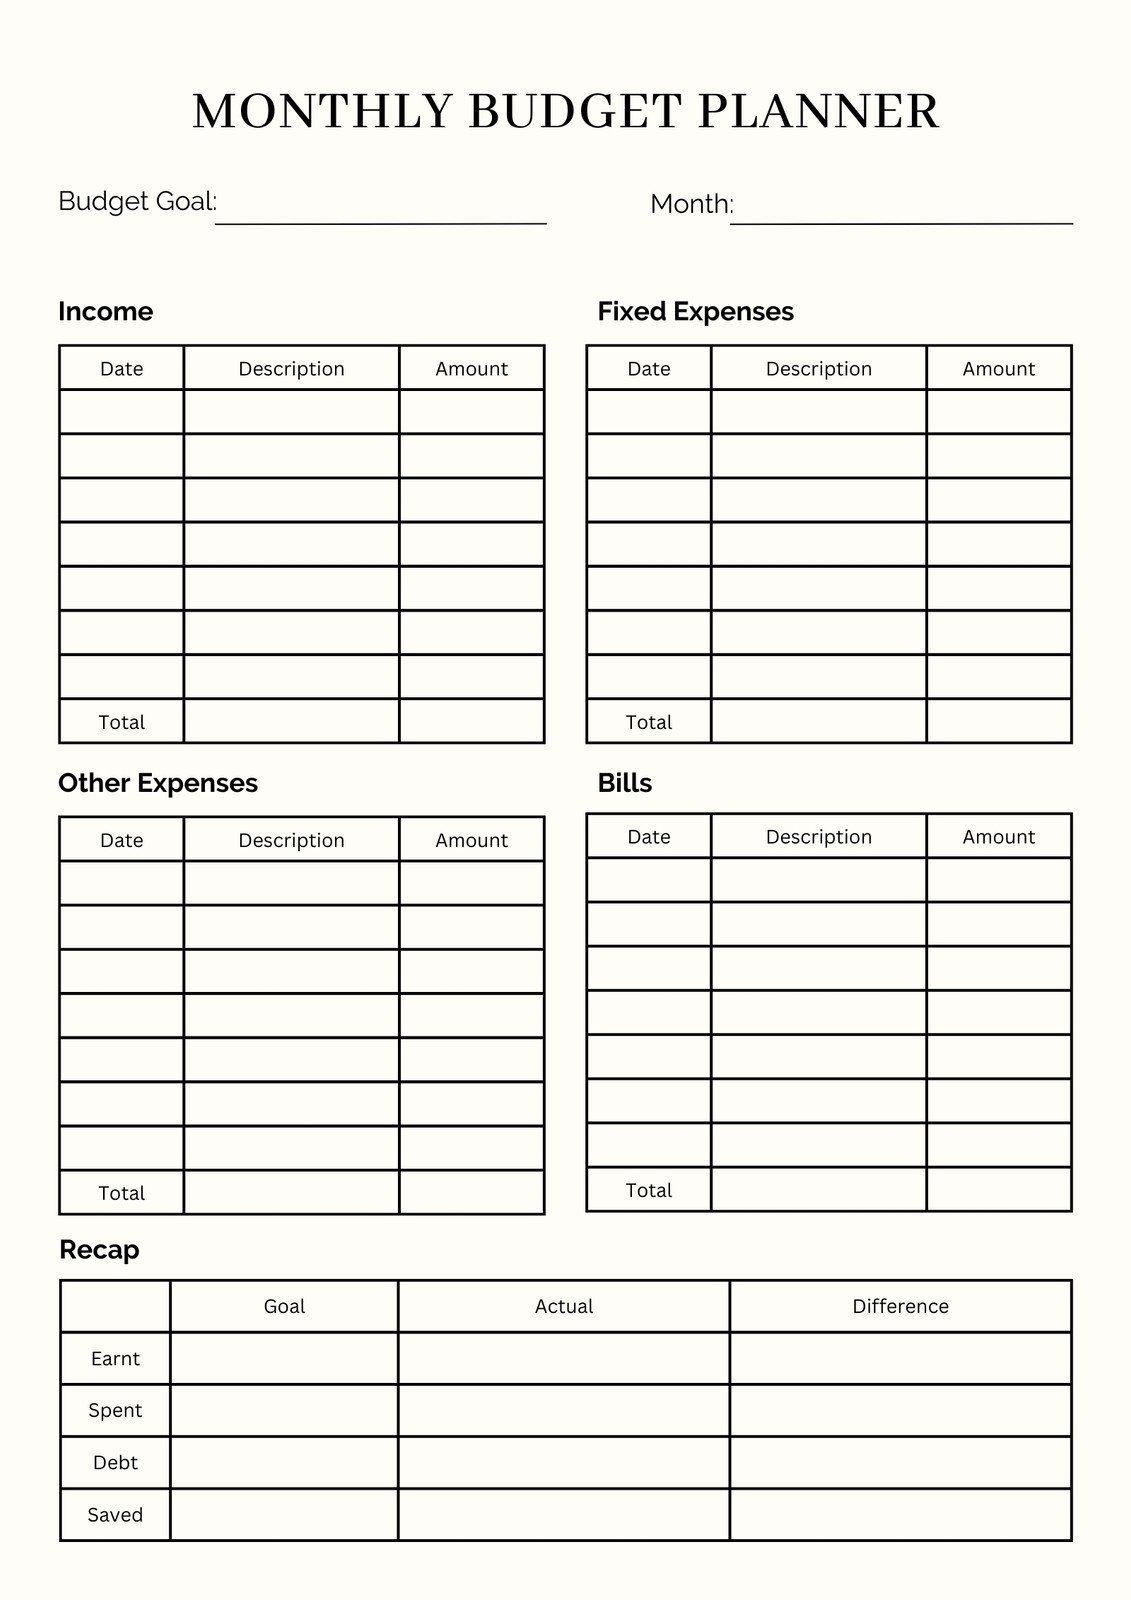 Free And Customizable Budget Templates - Free Printable Budget Forms